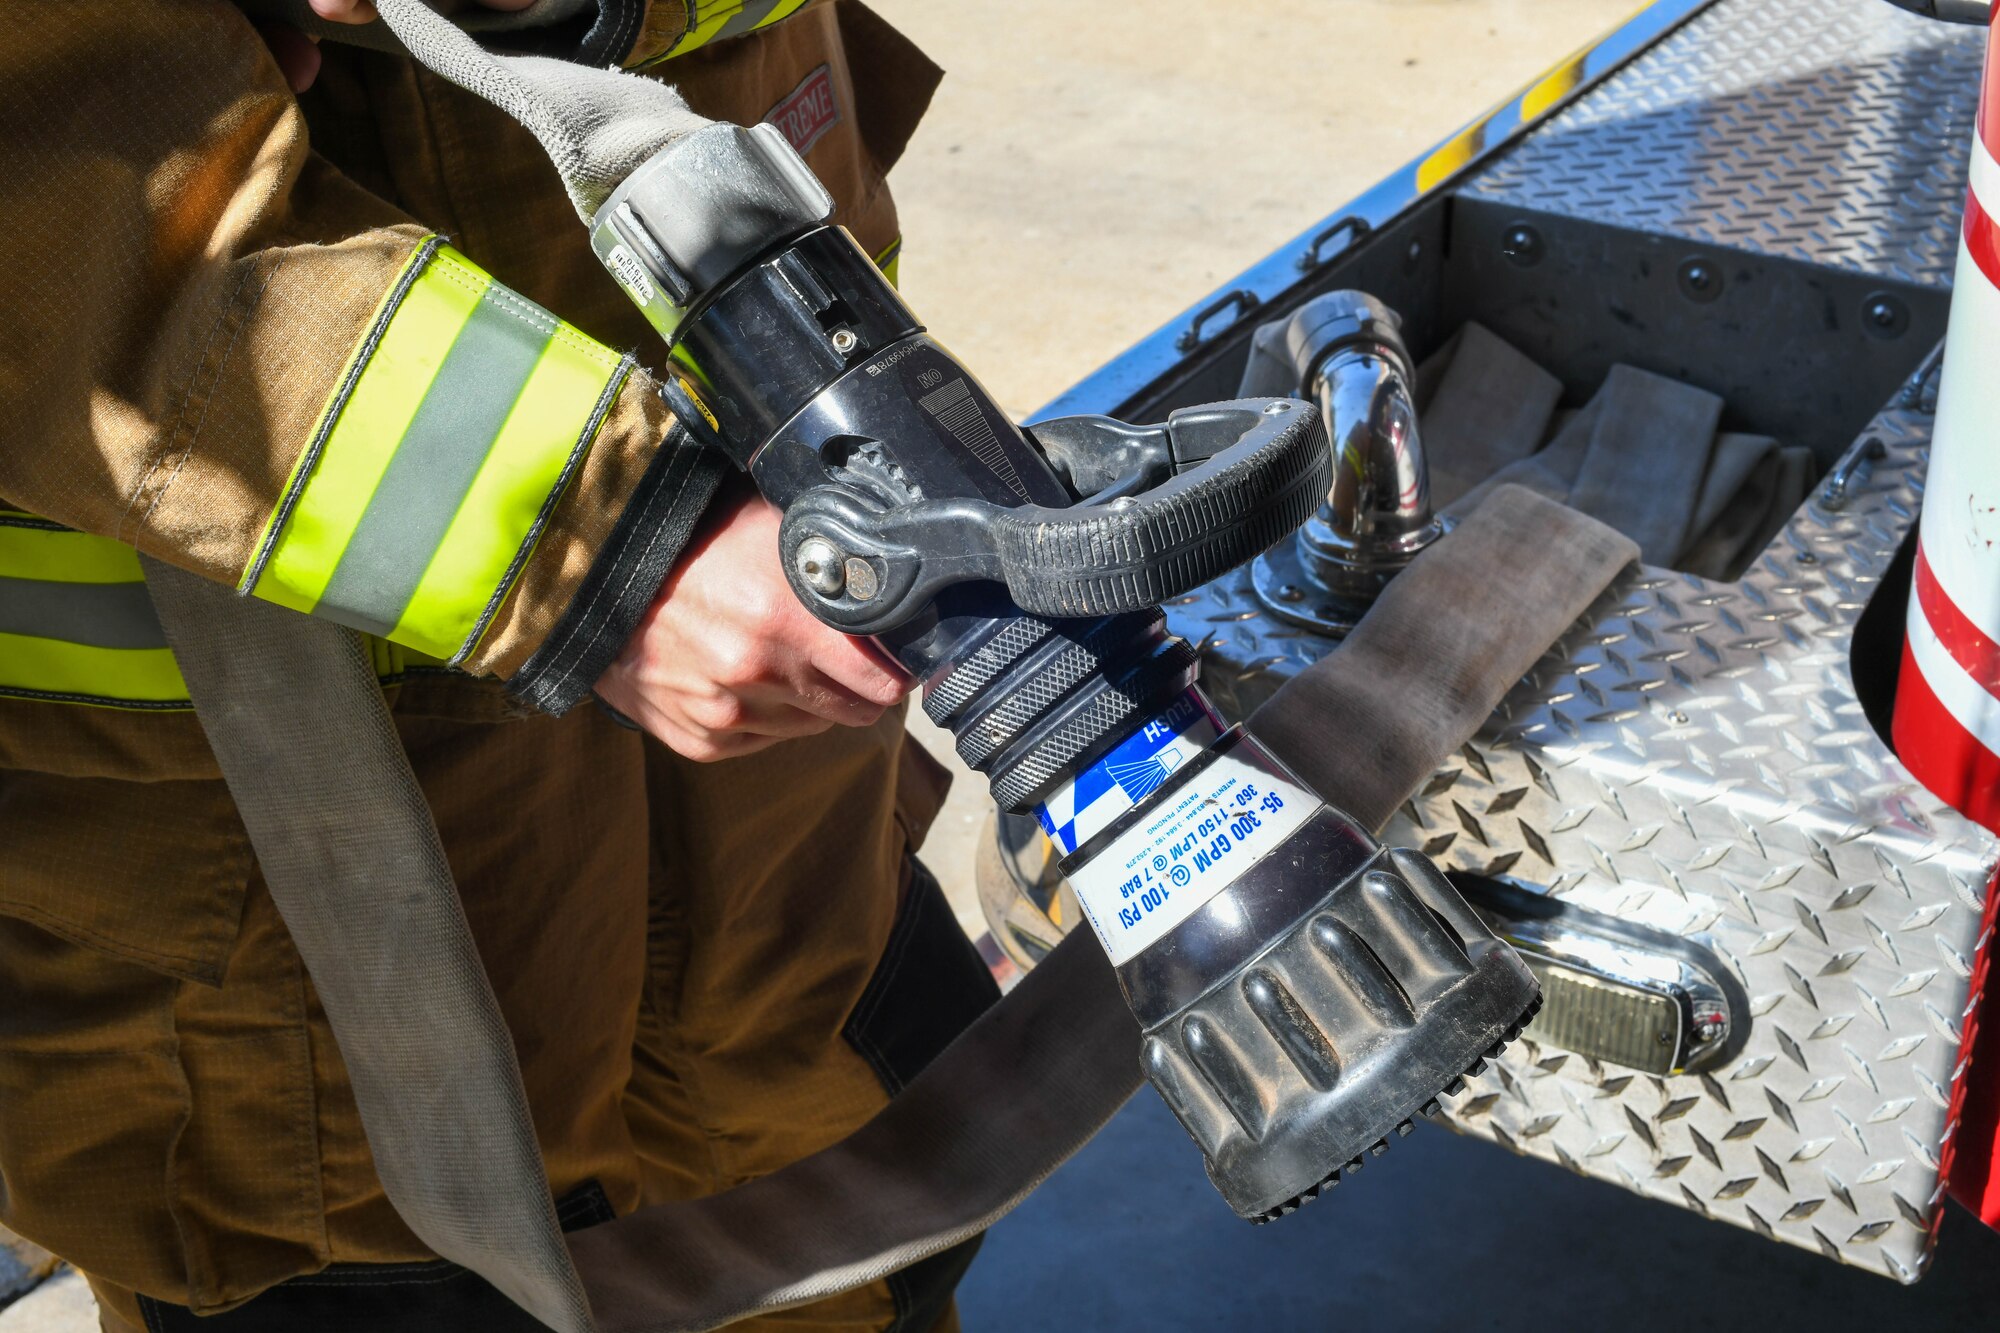 U.S. Air Force Airman 1st Class Joseph Coveney, 97th Civil Engineer Squadron (CES) fire prevention specialist, shows off one of the hoses attached to Engine 11 at the fire department on Altus Air Force Base, Oklahoma, Oct. 4, 2021. The fire hose is one of the basic, essential pieces of firefighting equipment. (U.S. Air Force photo by Airman 1st Class Trenton Jancze)